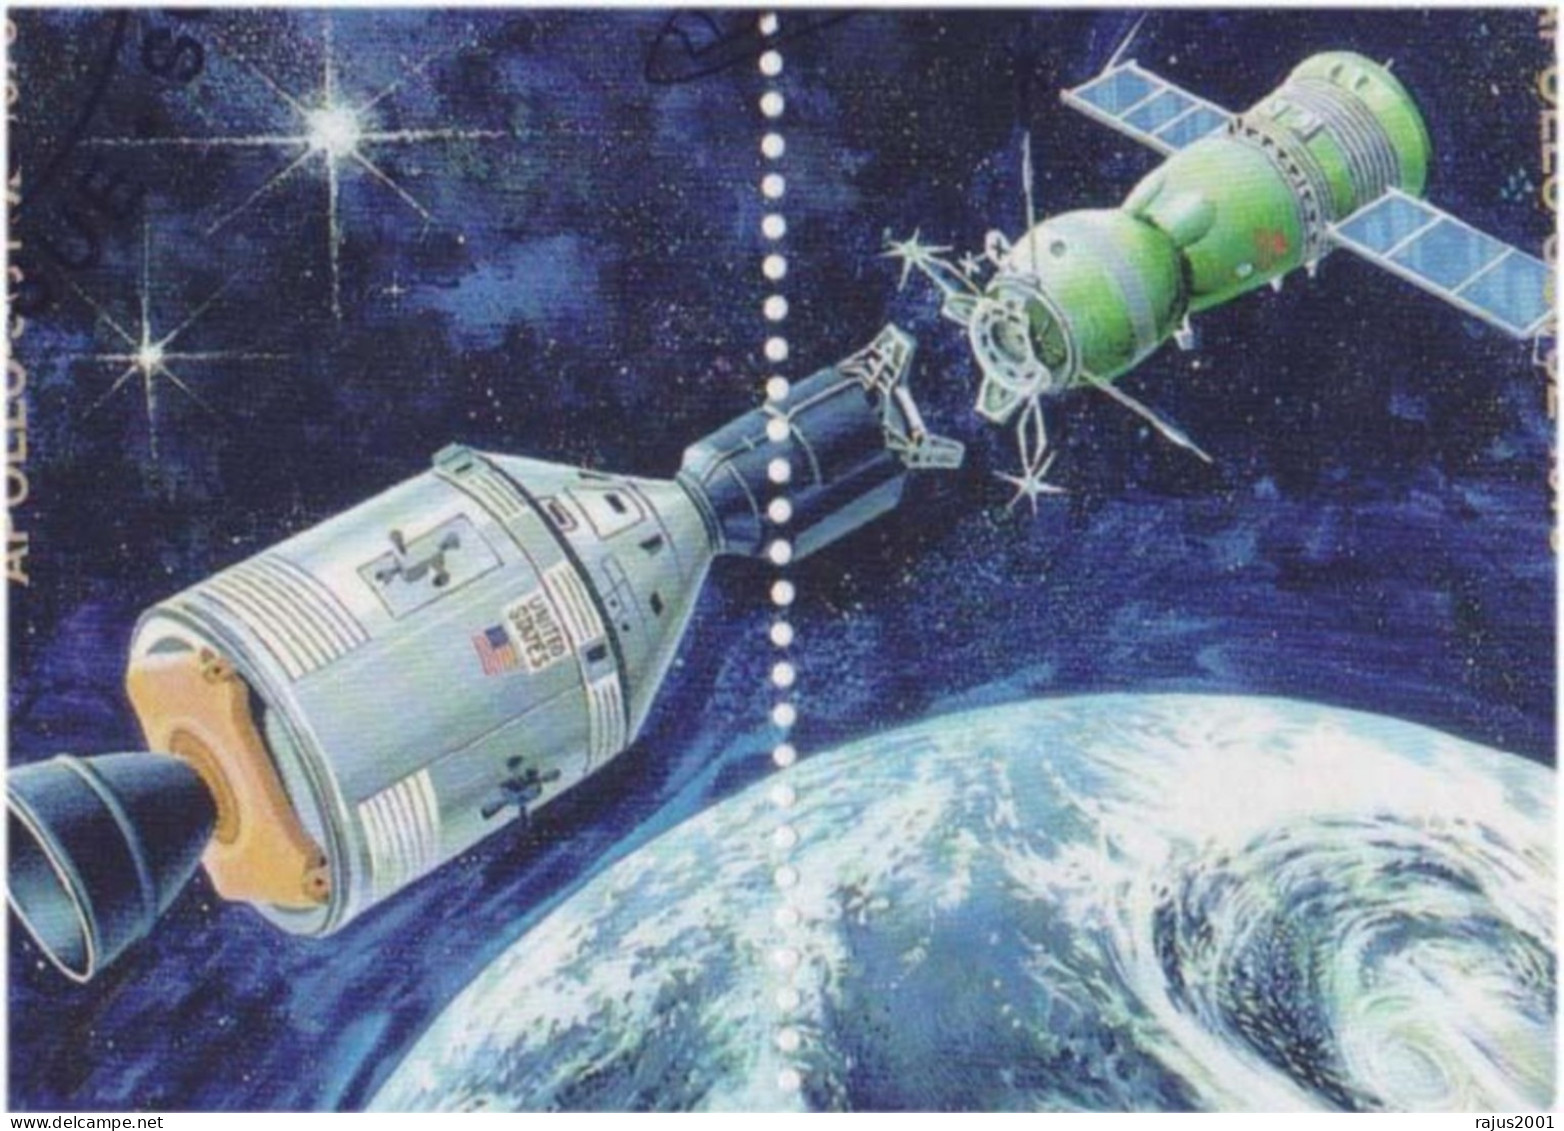 MIR Shuttle APOLLO-SOYUZ Link Up, First Joint Space Flight Between US And USSR, Earth, Planet, Astronomy, Marshall FDC - Sterrenkunde